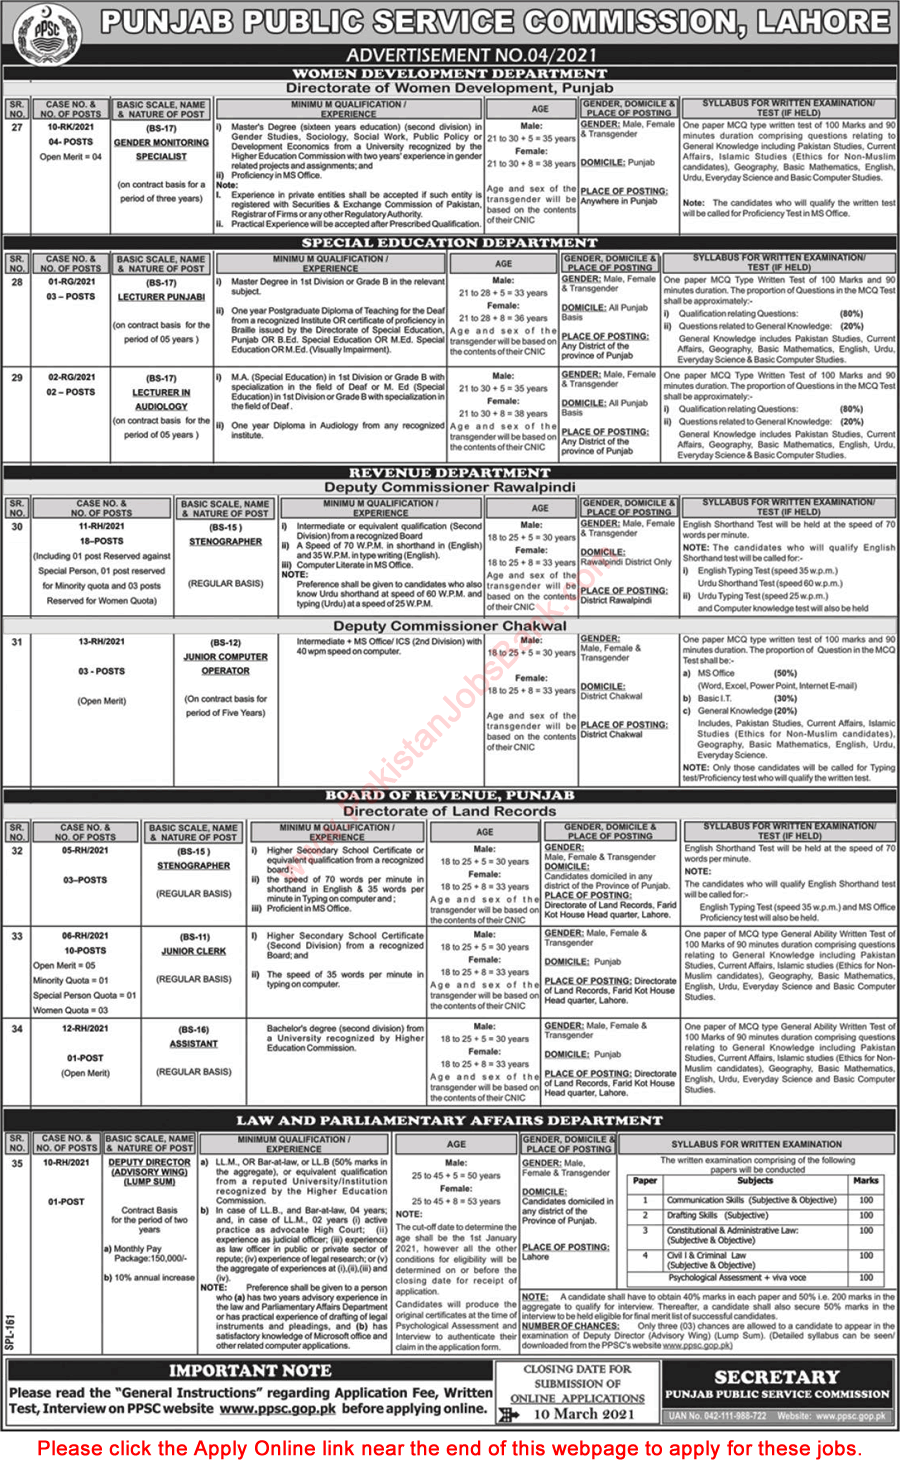 PPSC Jobs February 2021 Apply Online Consolidated Advertisement No 04/2021 4/2021 Latest